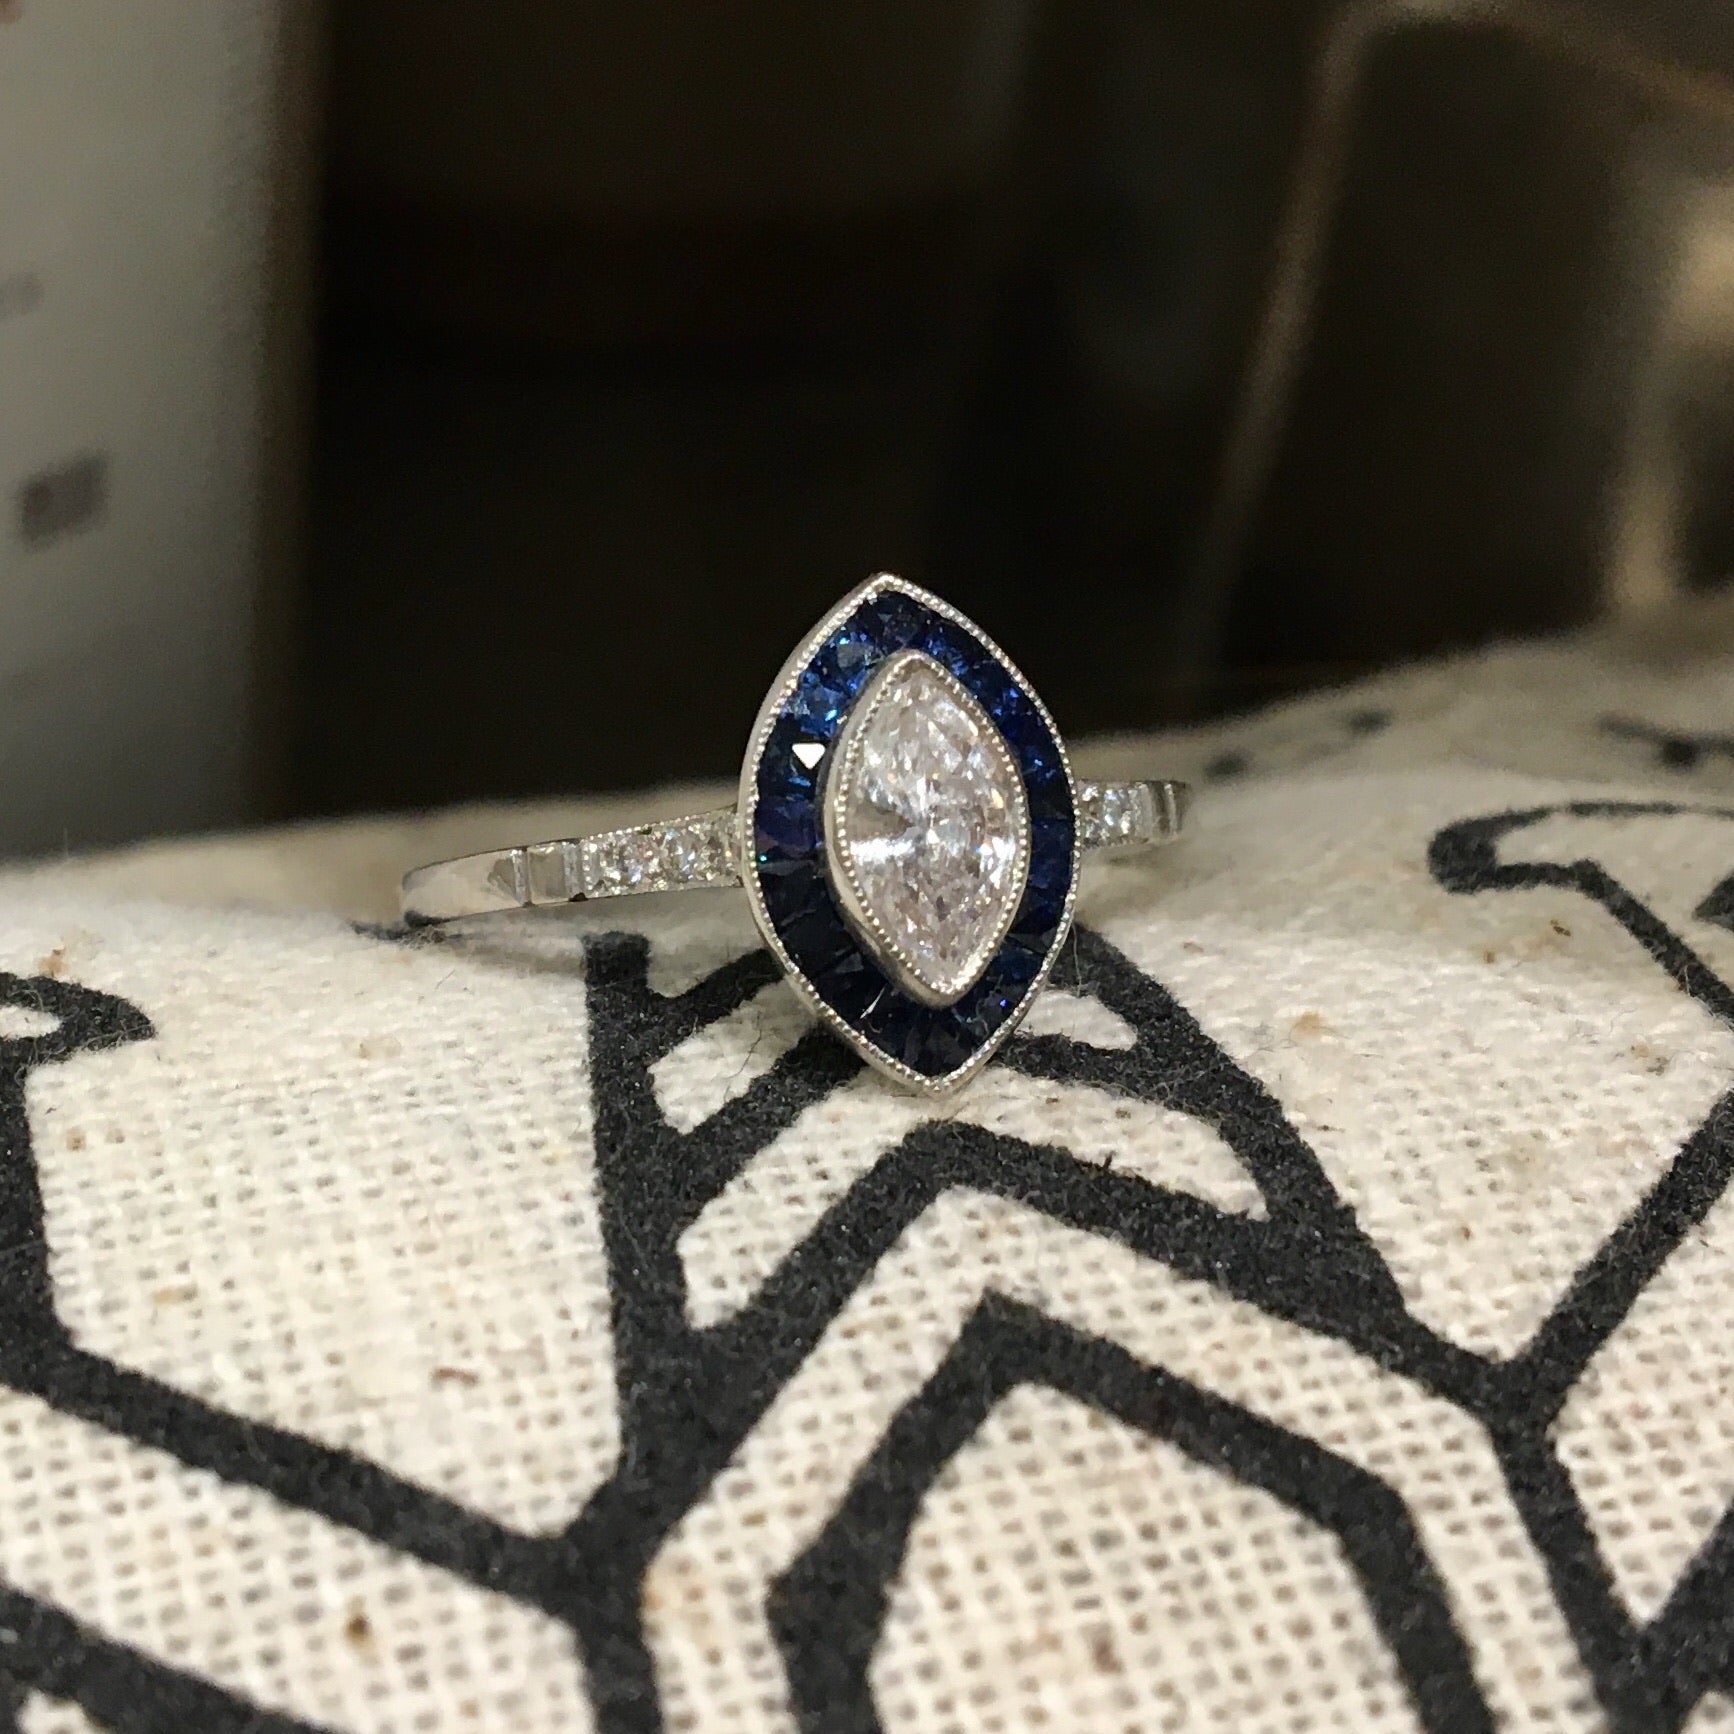 Right Hand Ring Modern .33 Marquise Cut Diamond in PlatinumComposition: Platinum Ring Size: 7.25 Total Diamond Weight: .42 cttwct Total Gram Weight: 2.8 rams g Inscription: 0.33
      